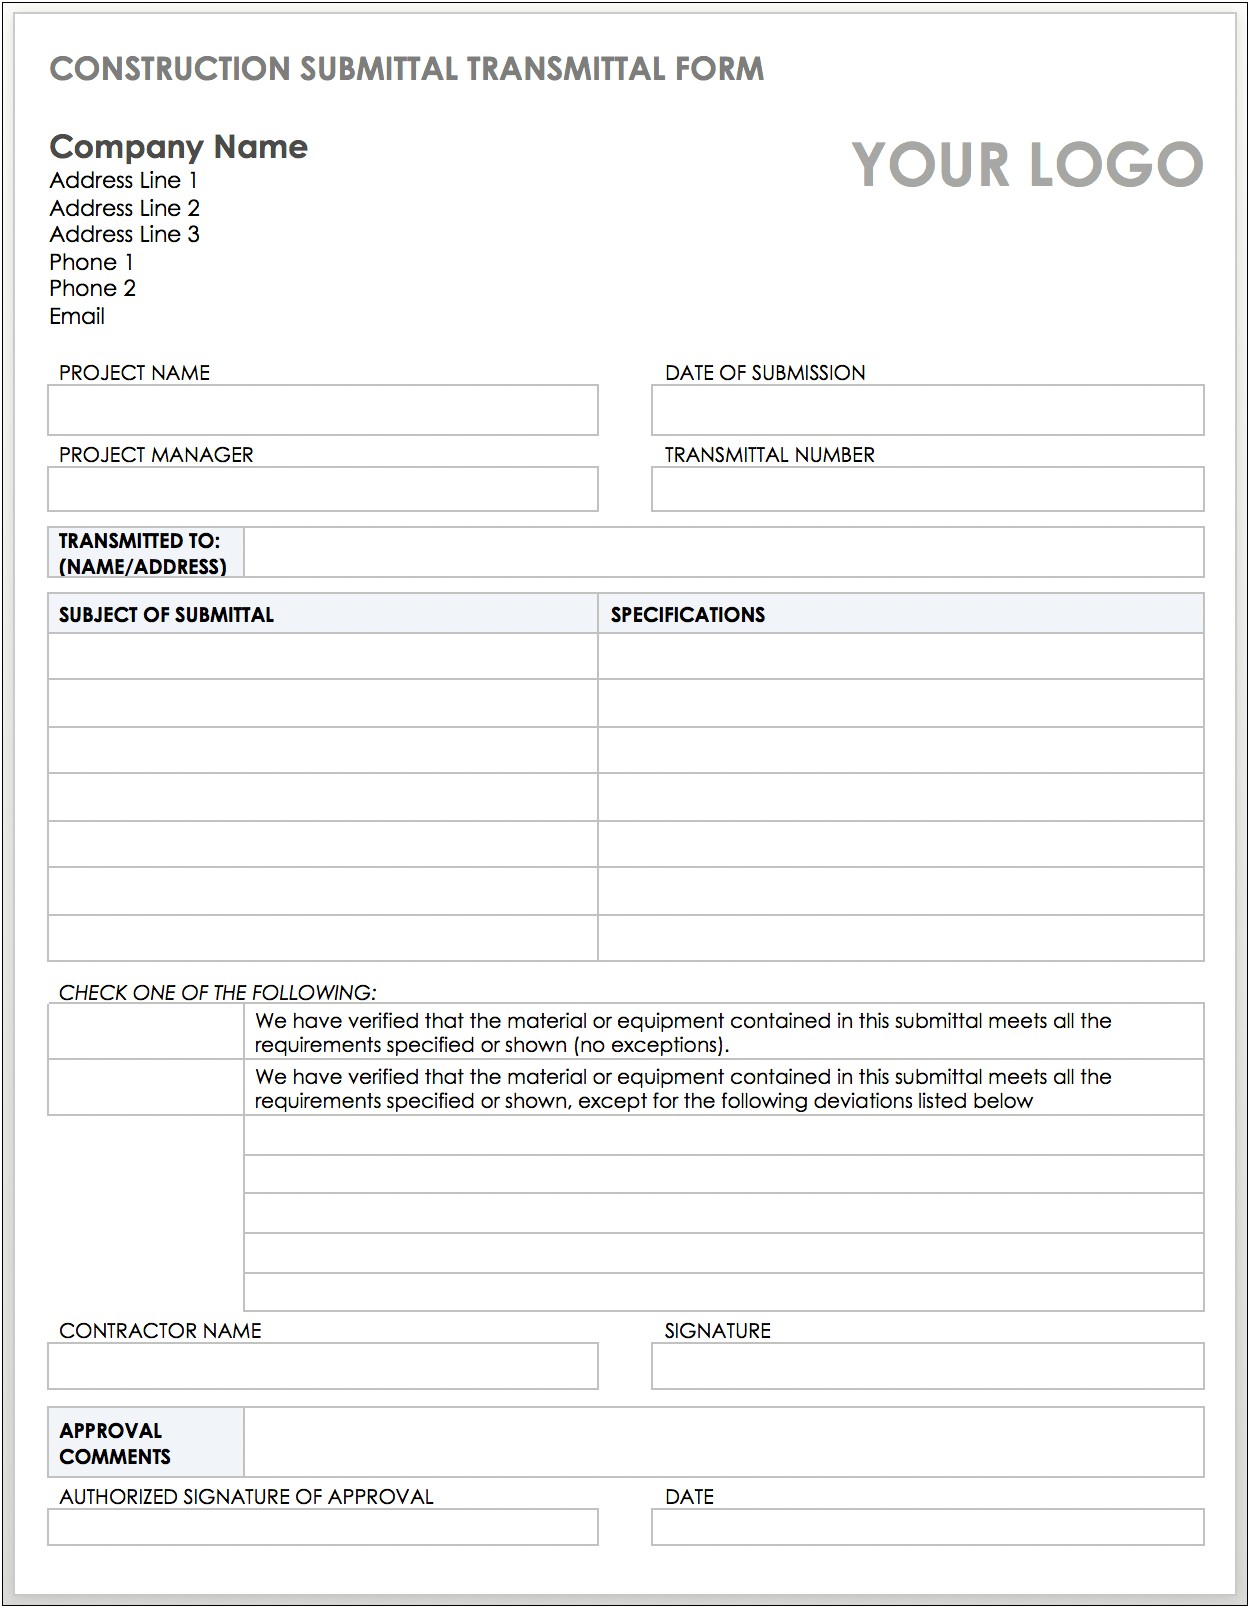 Internet Draft Submission Form Word Template